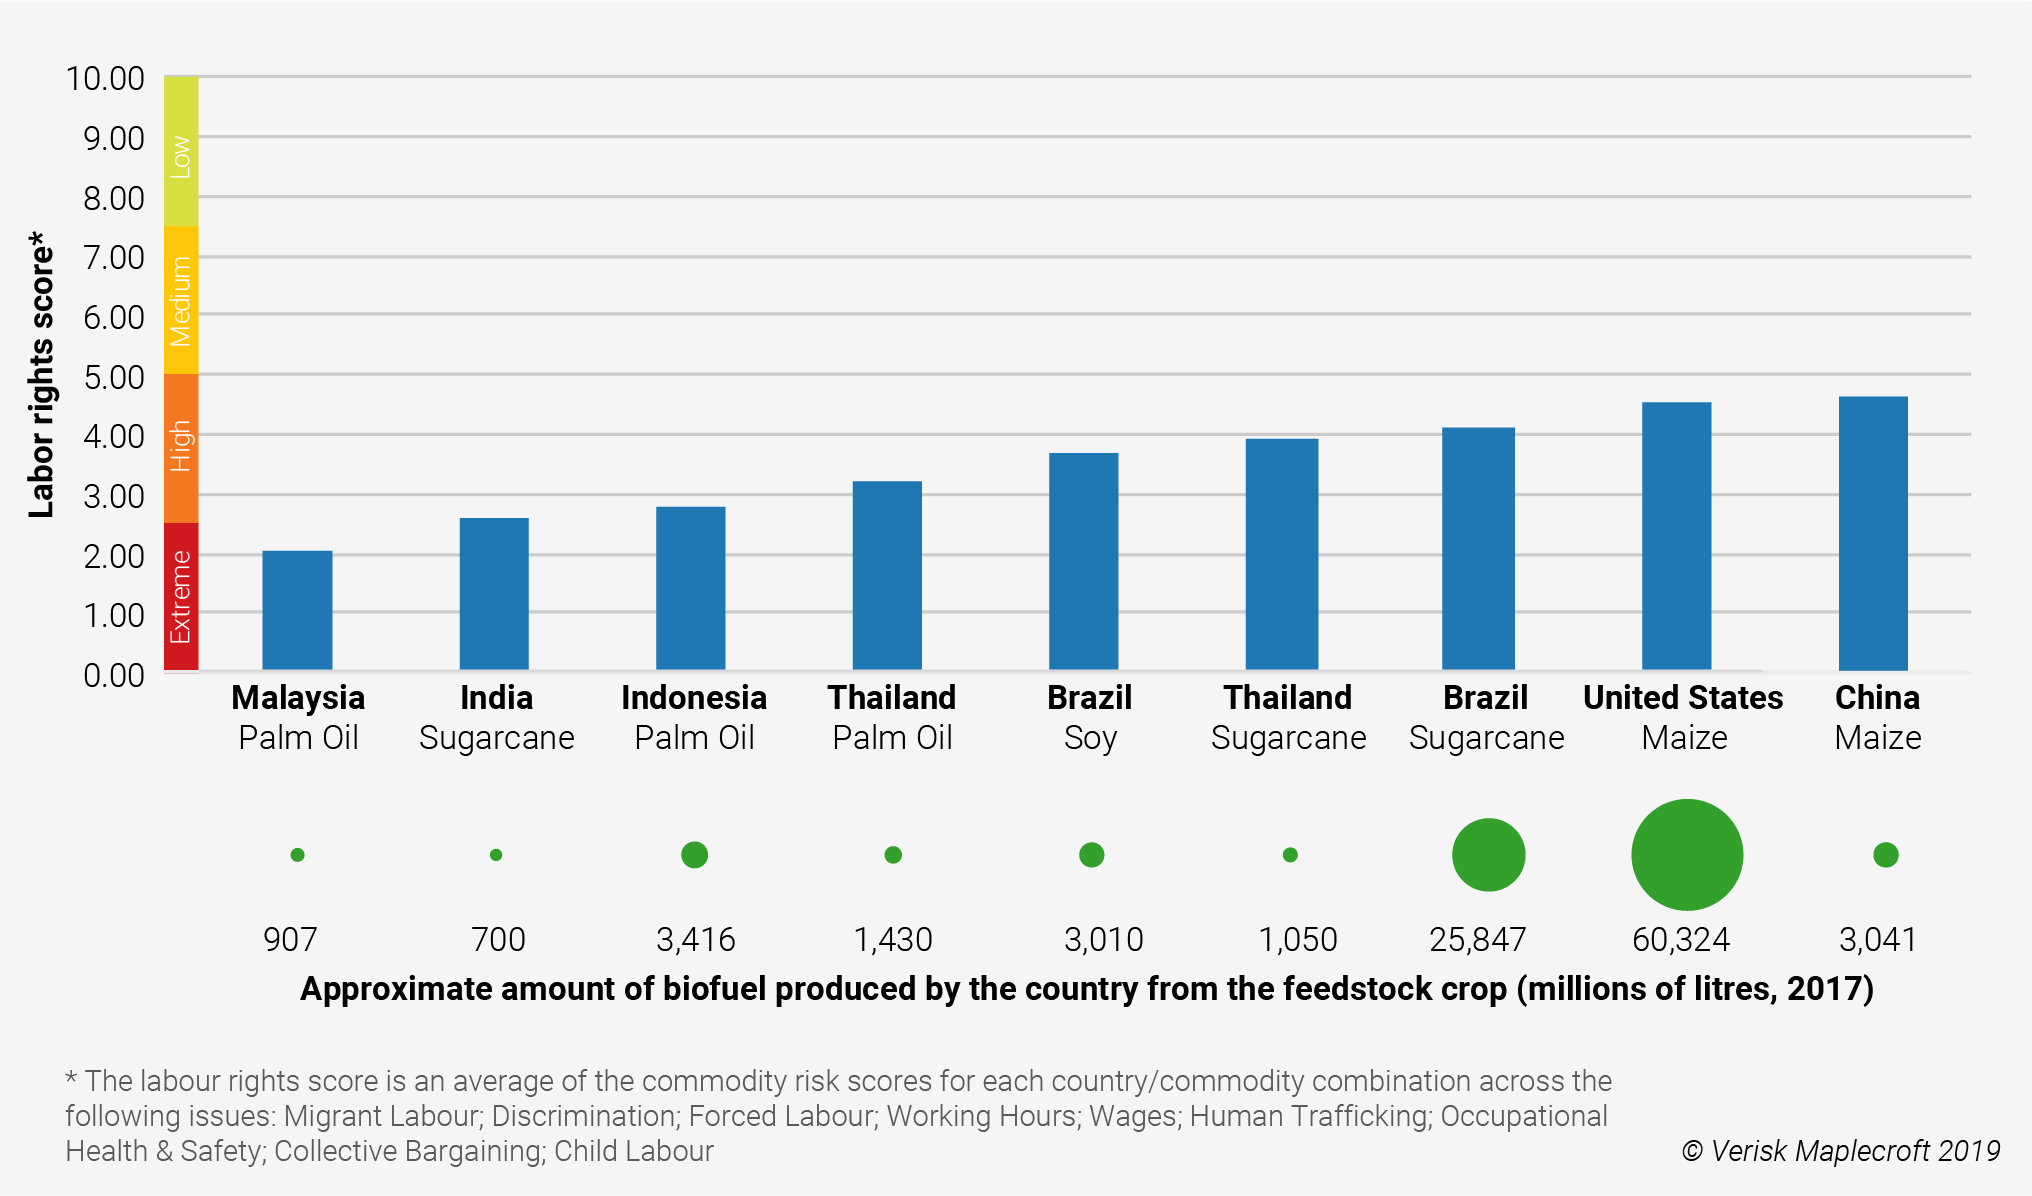 Labour rights scores for palm oil and sugarcane cultivation reveal high risks in biofuel inputs